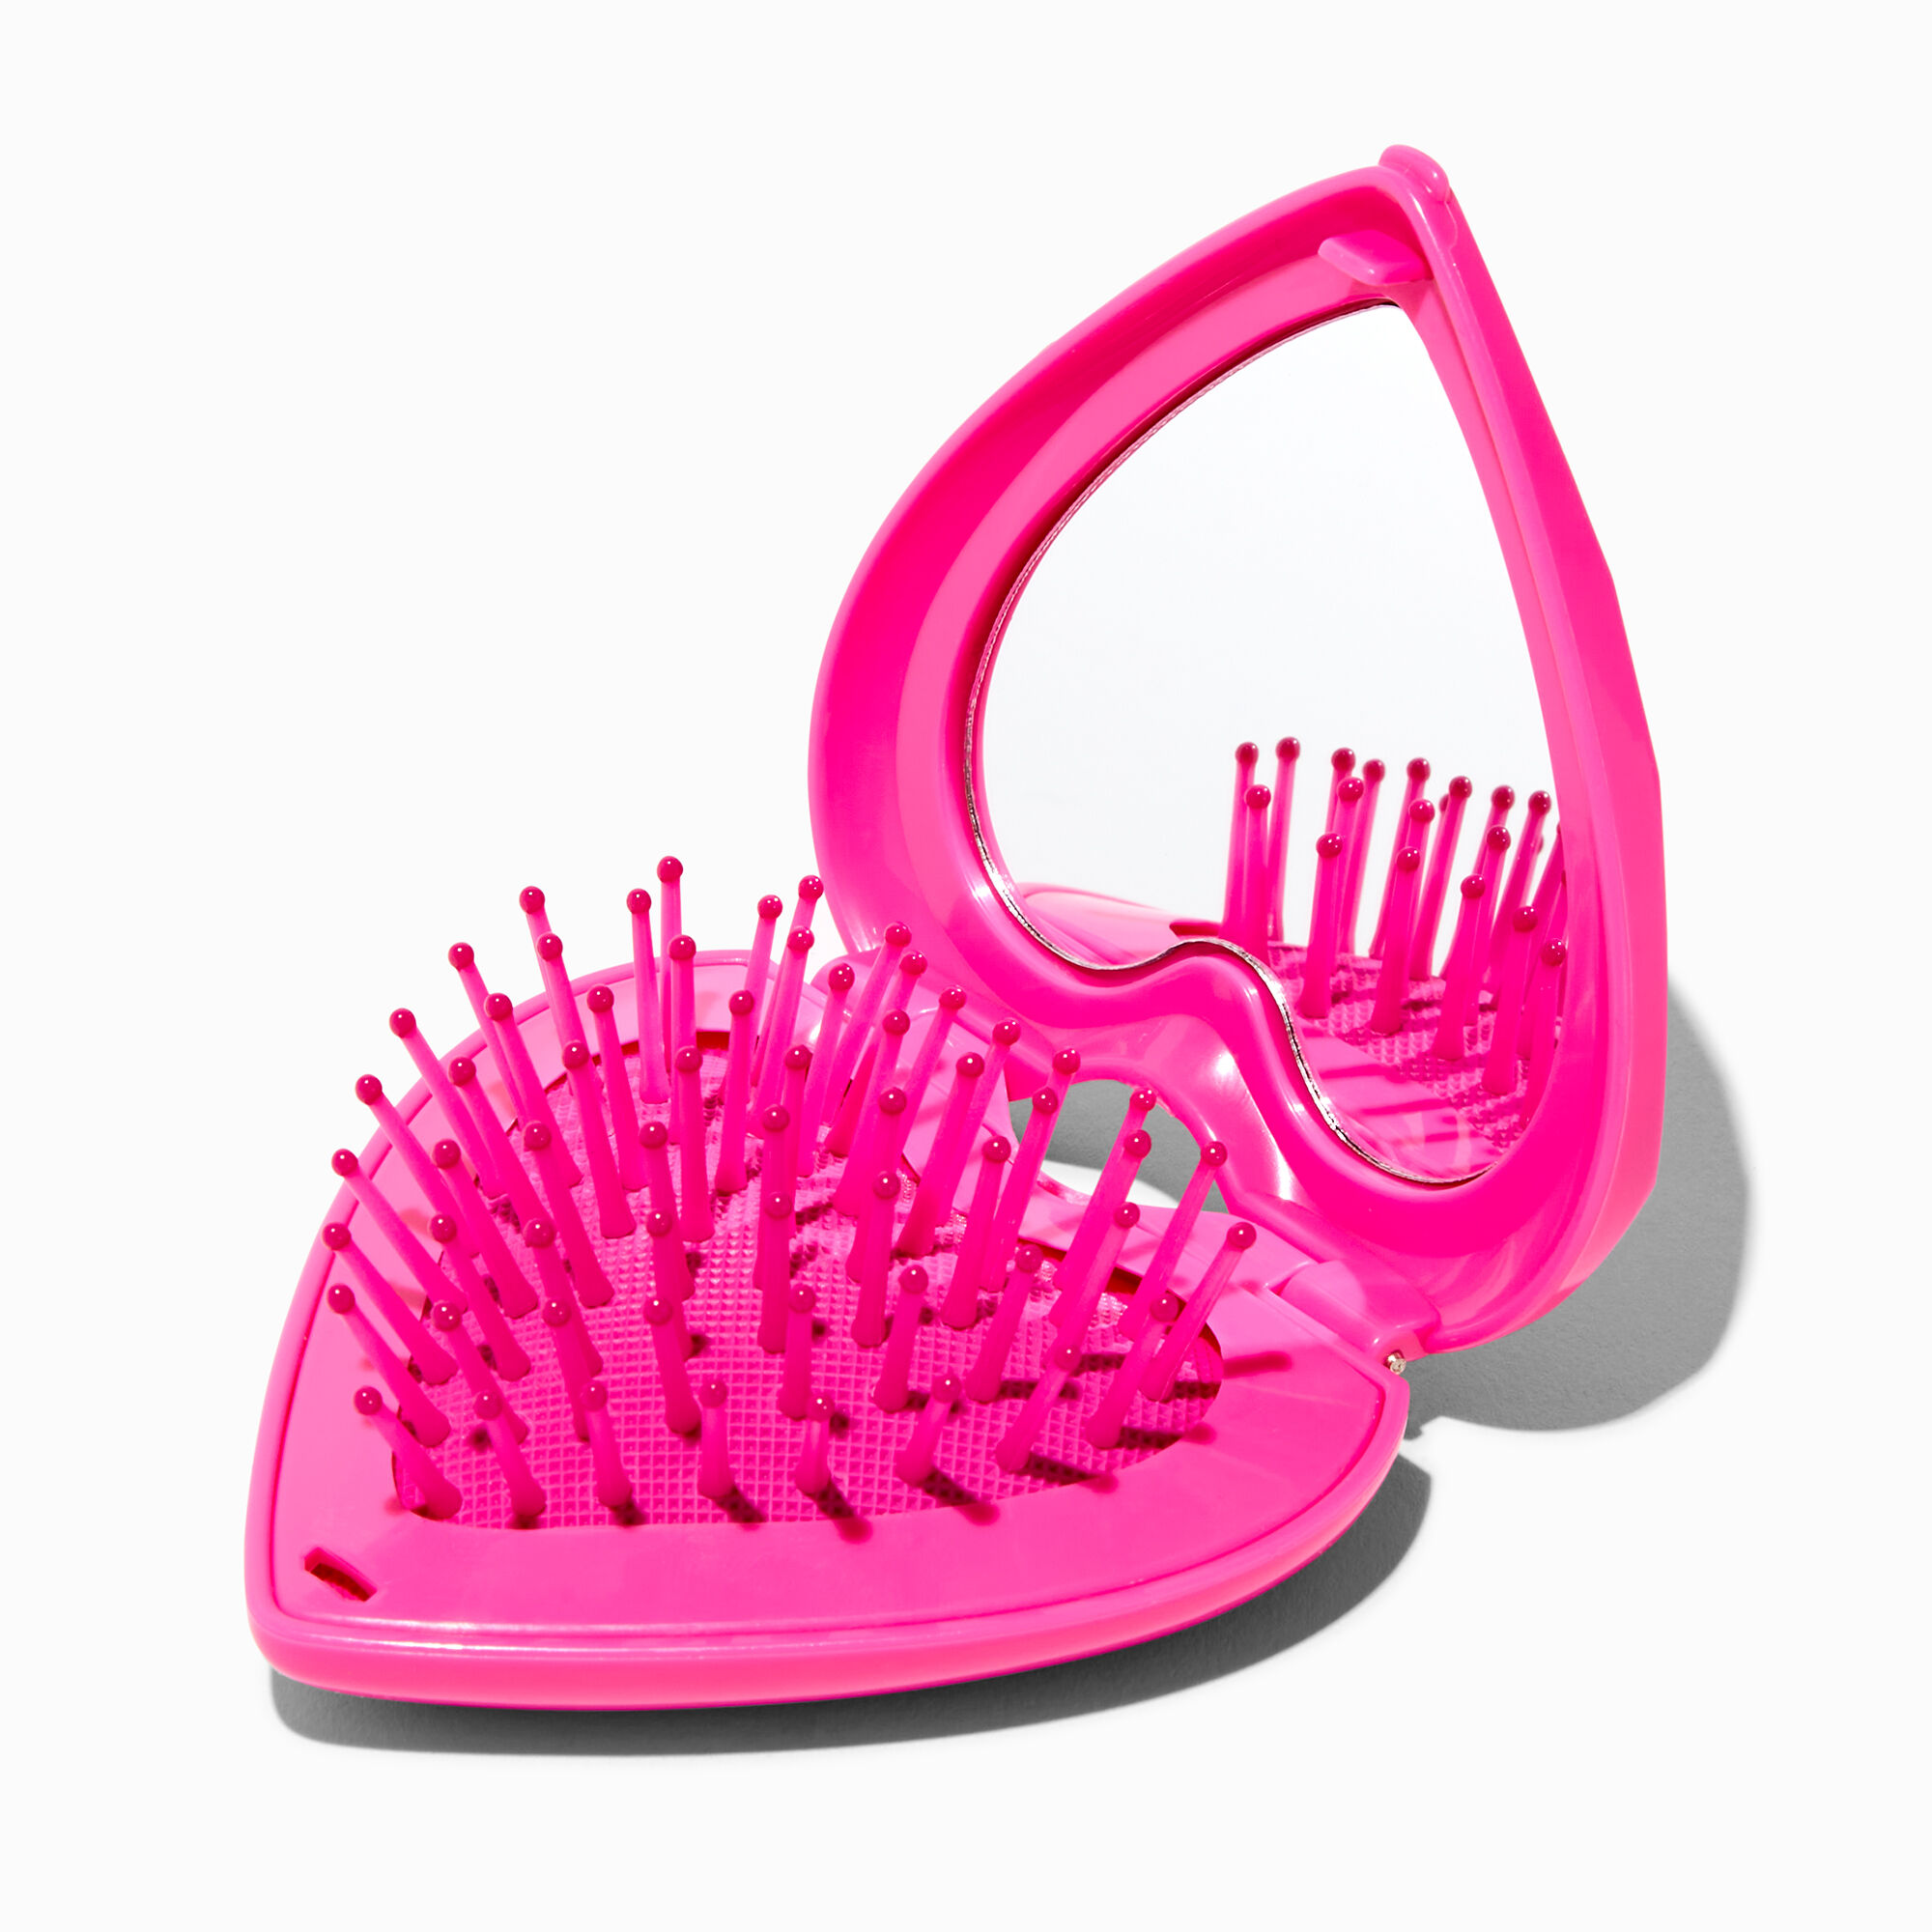 View Claires Heart PopUp Hair Brush Pink information